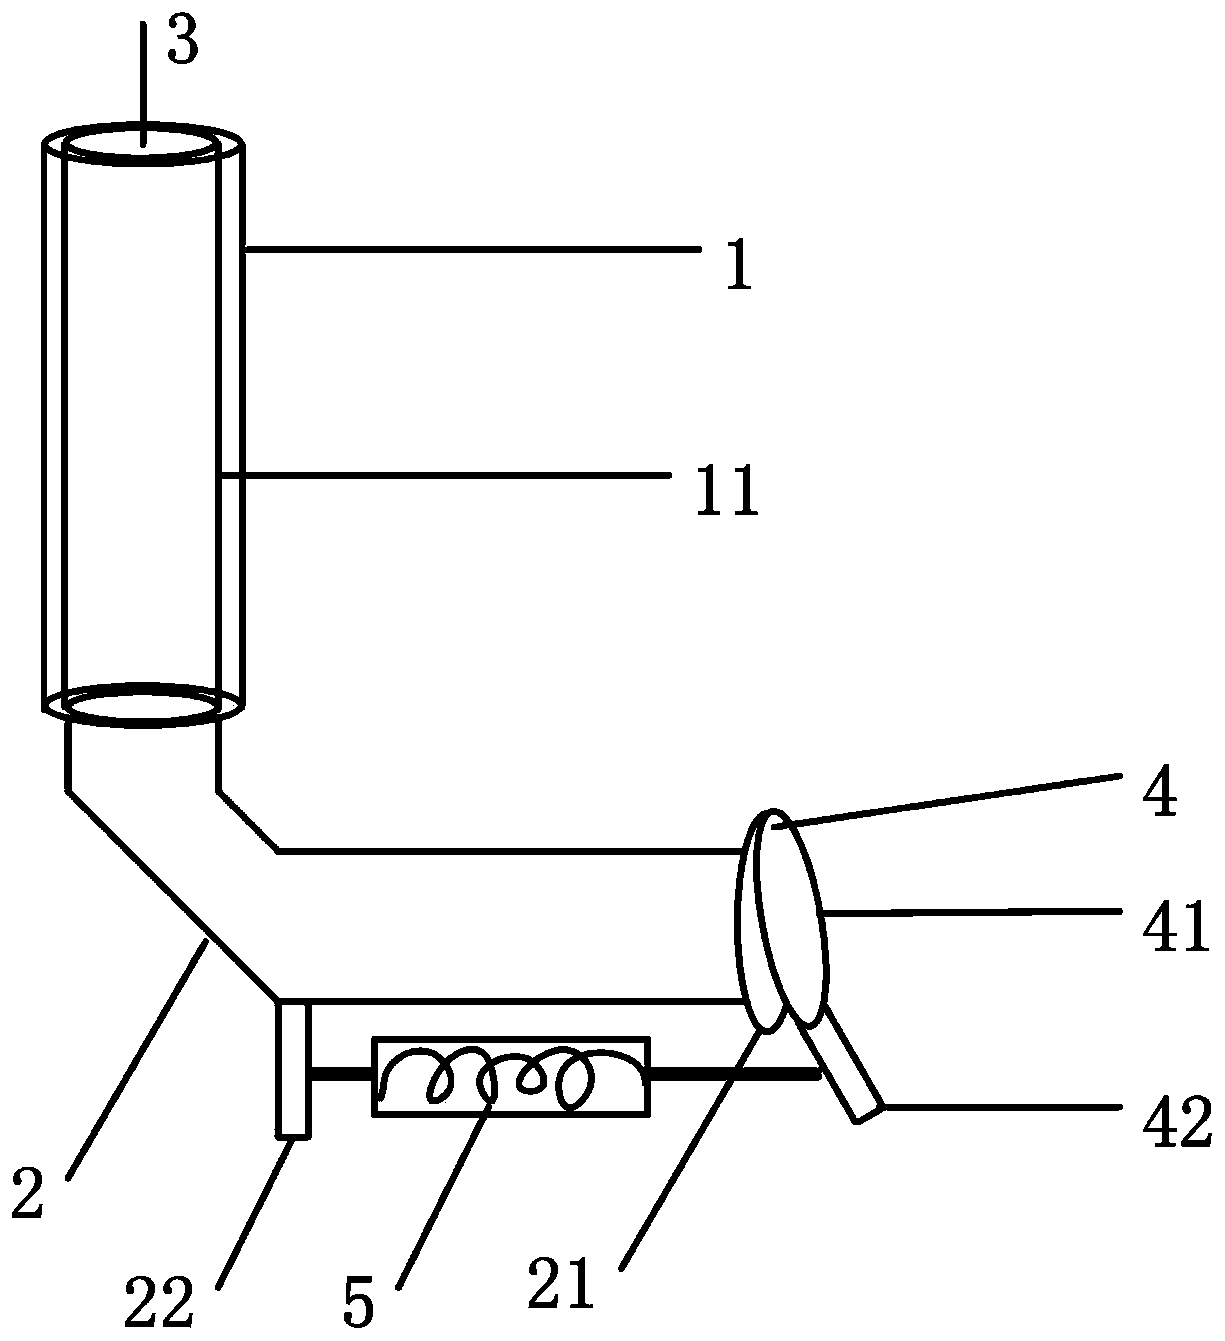 Water drainage device